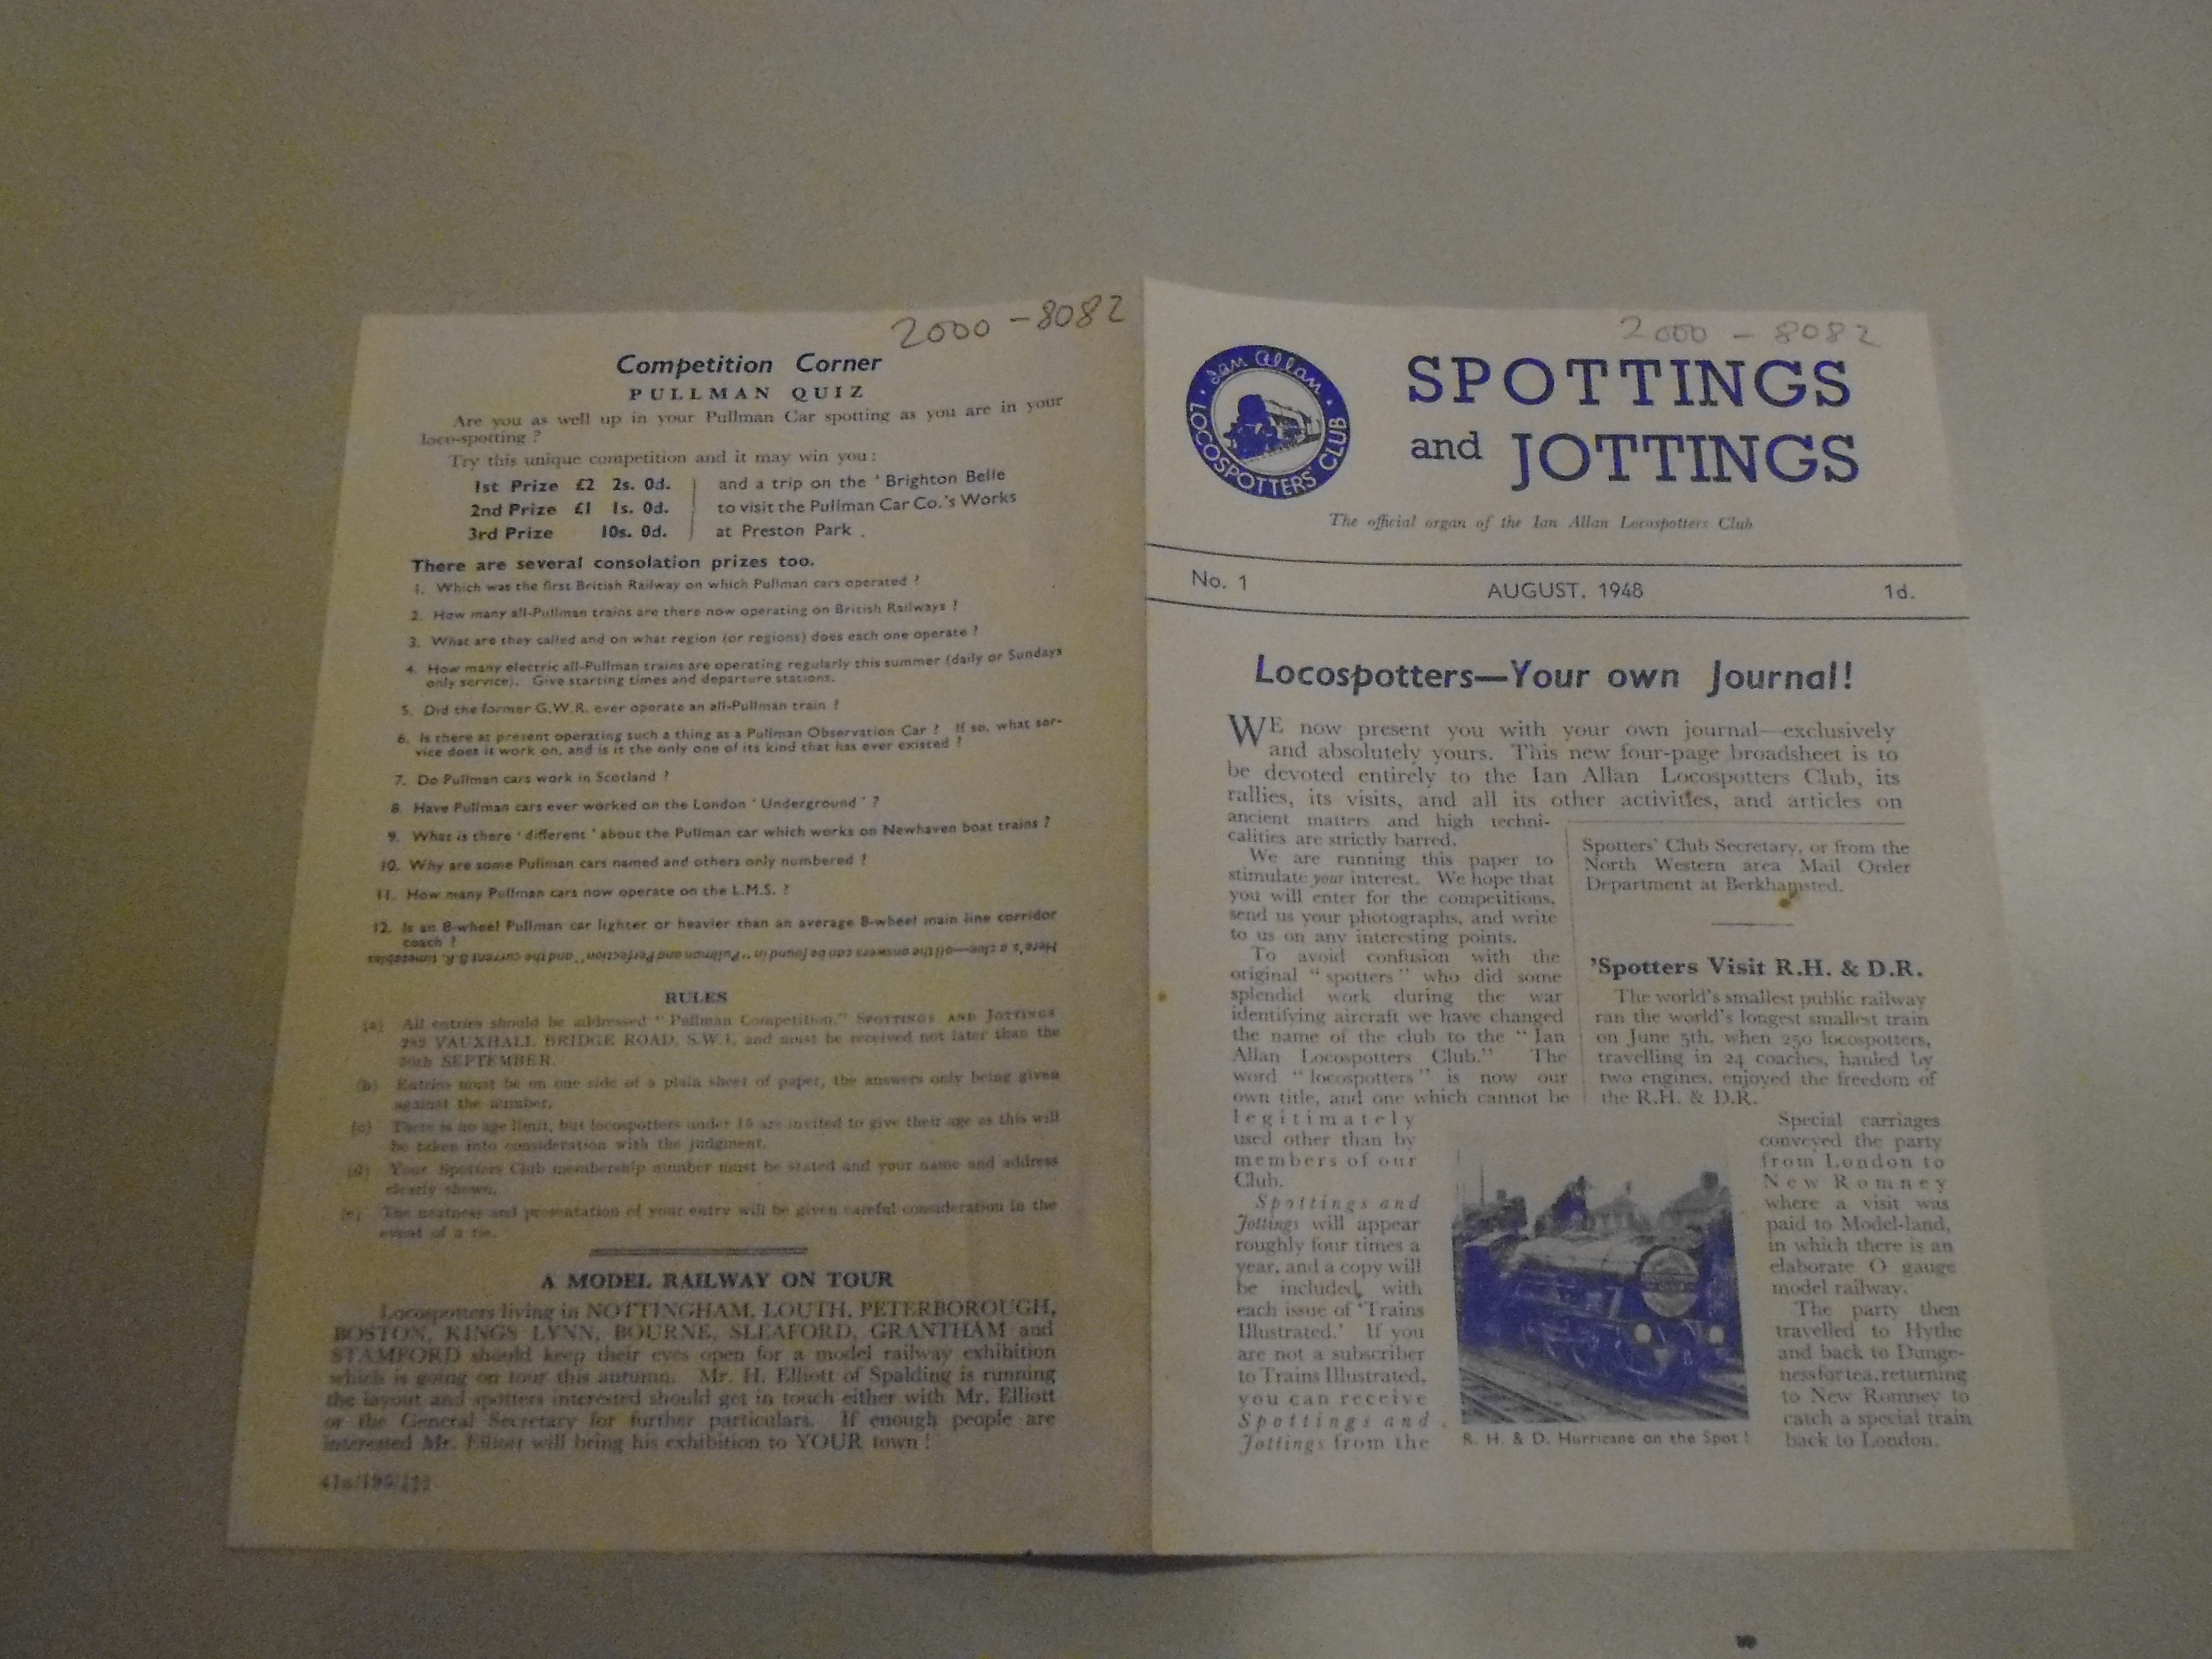 Spottings and jottings - the journal of Ian Allan's Locospotters Club